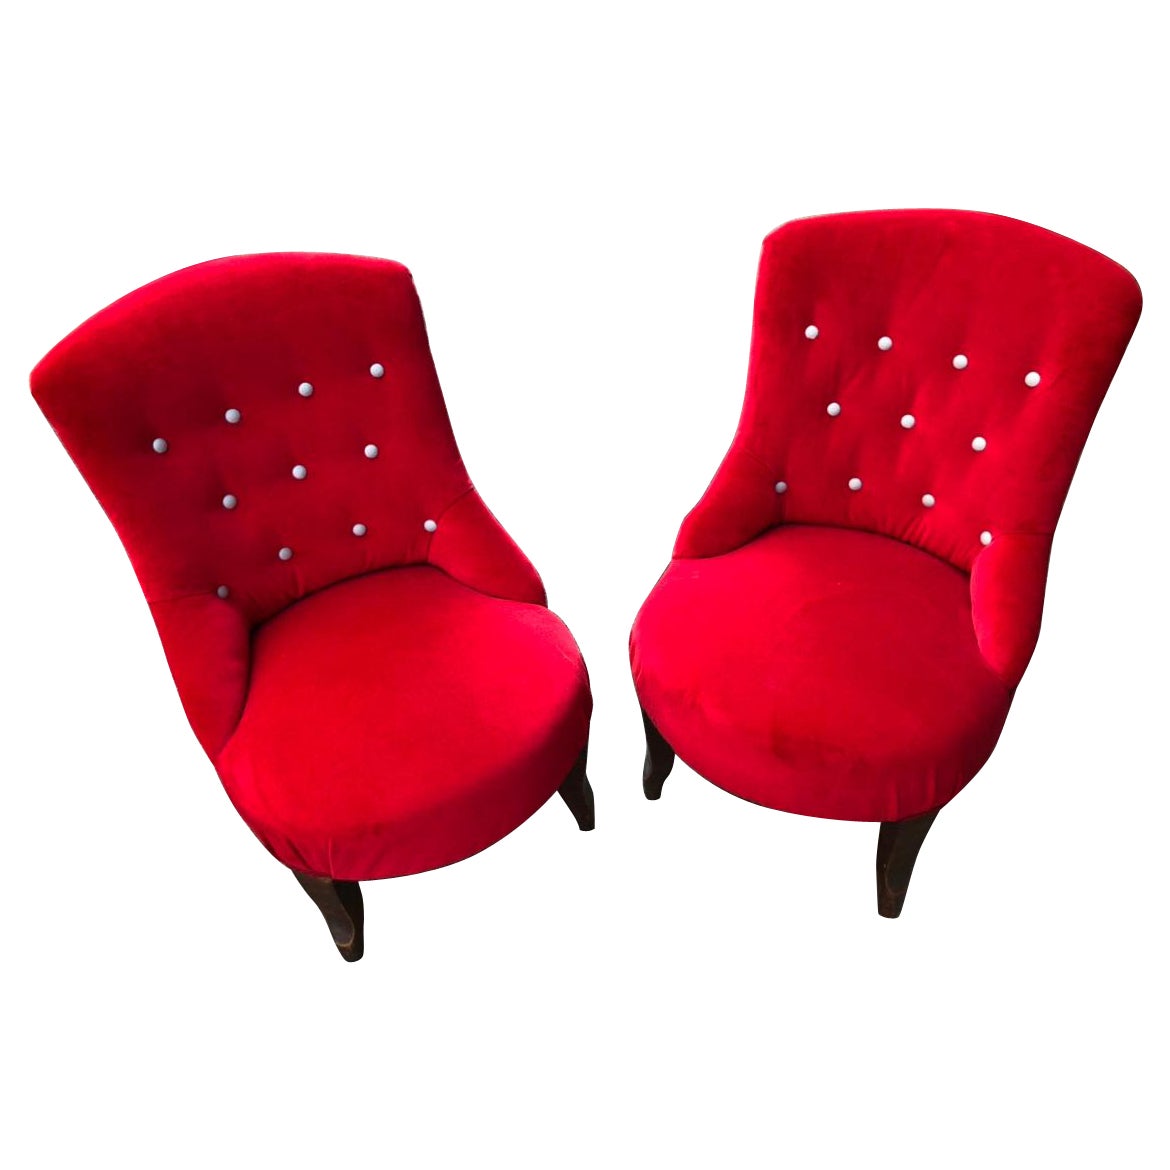 Red Velvet Armchairs 1900s, Antiques For Sale